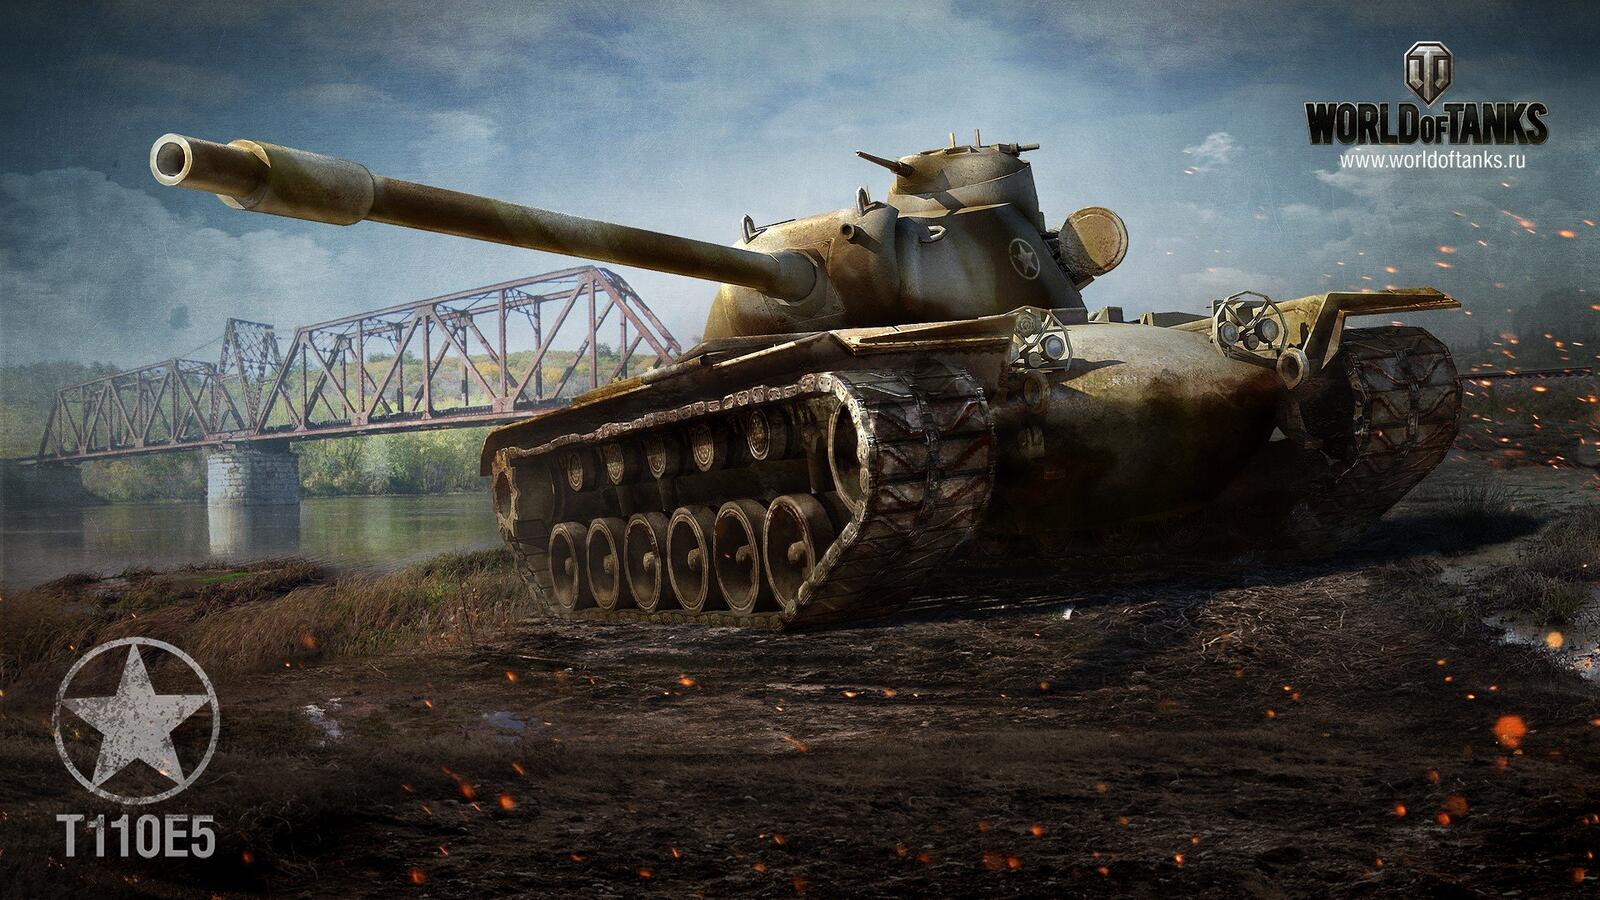 Free photo T110e5 from the game World of Tanks